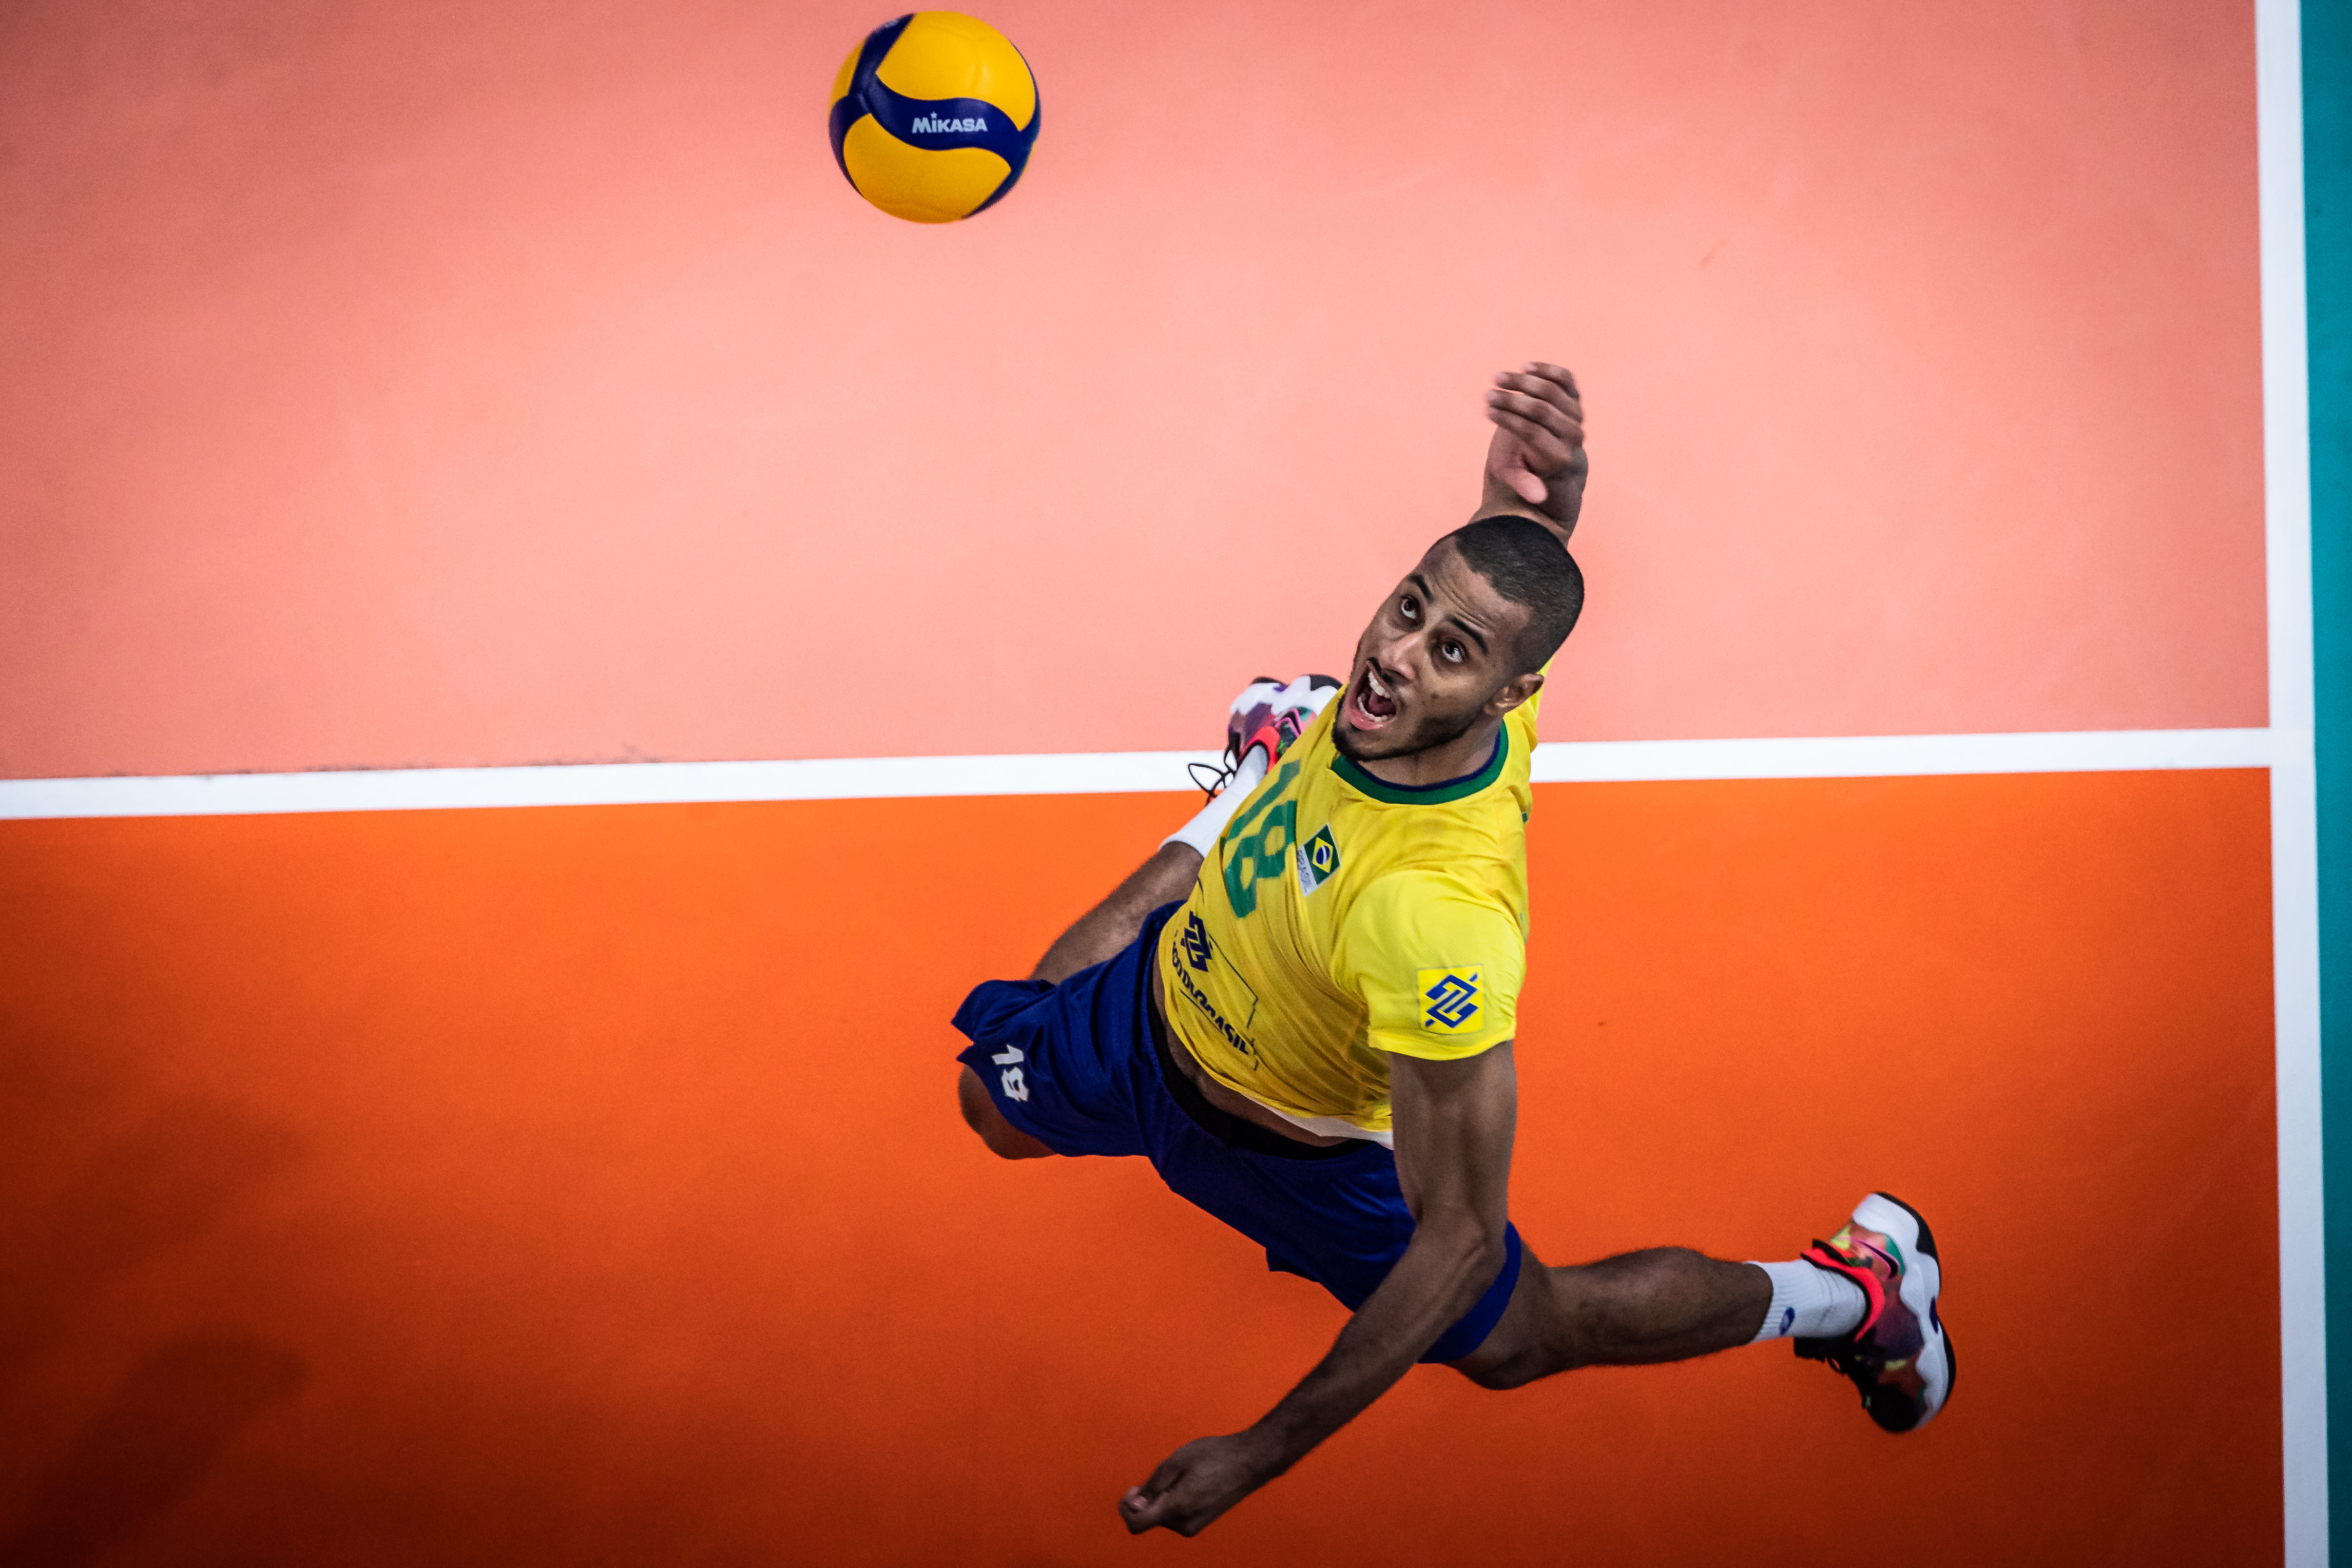 Lucarelli leads Brazil to sweep of Serbia volleyballworld